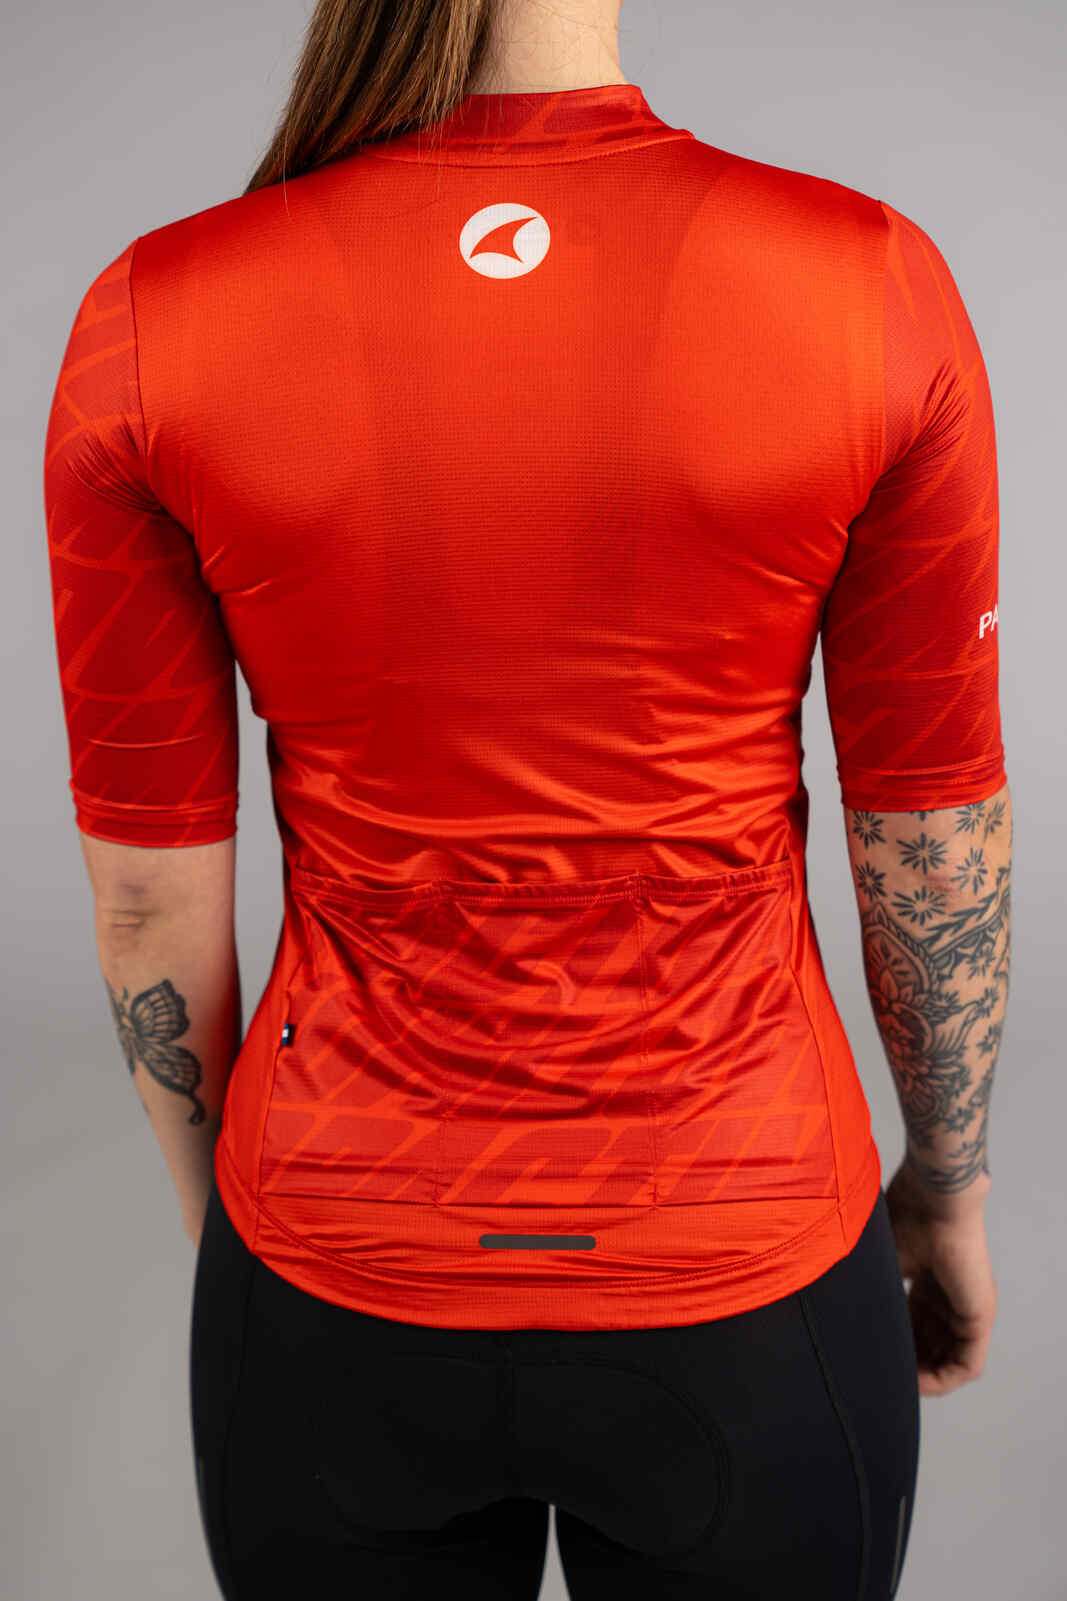 Women's Red Ascent Aero Cycling Jersey - Back Pockets